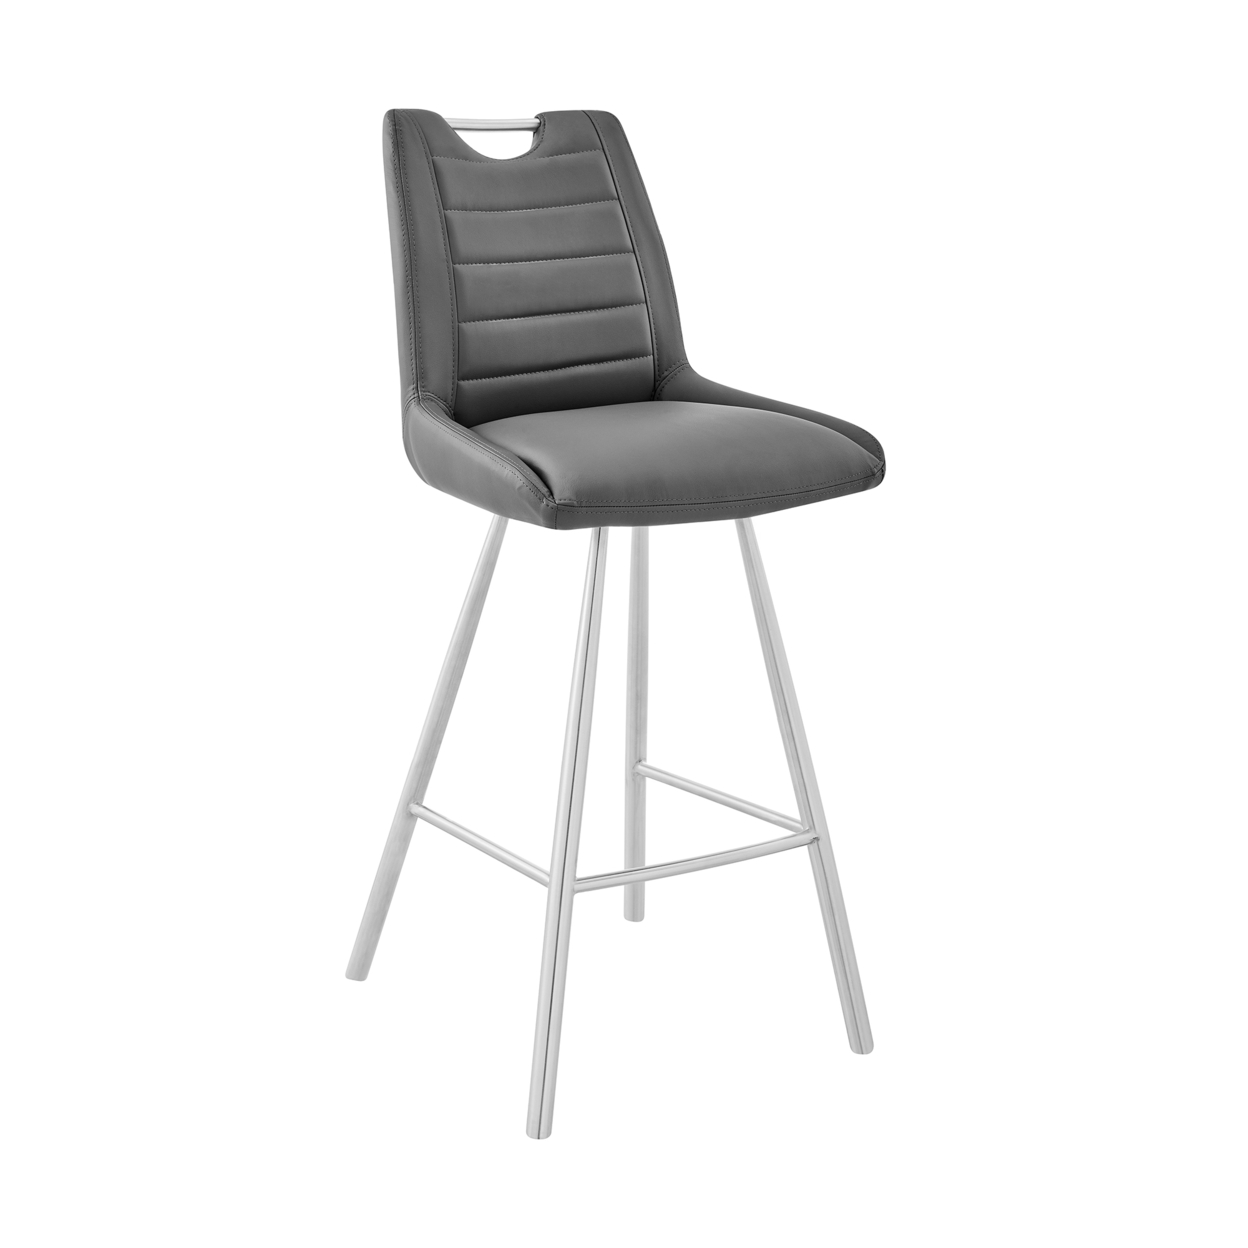 30 Inch Faux Leather Bar Stool, Silver And Charcoal- Saltoro Sherpi